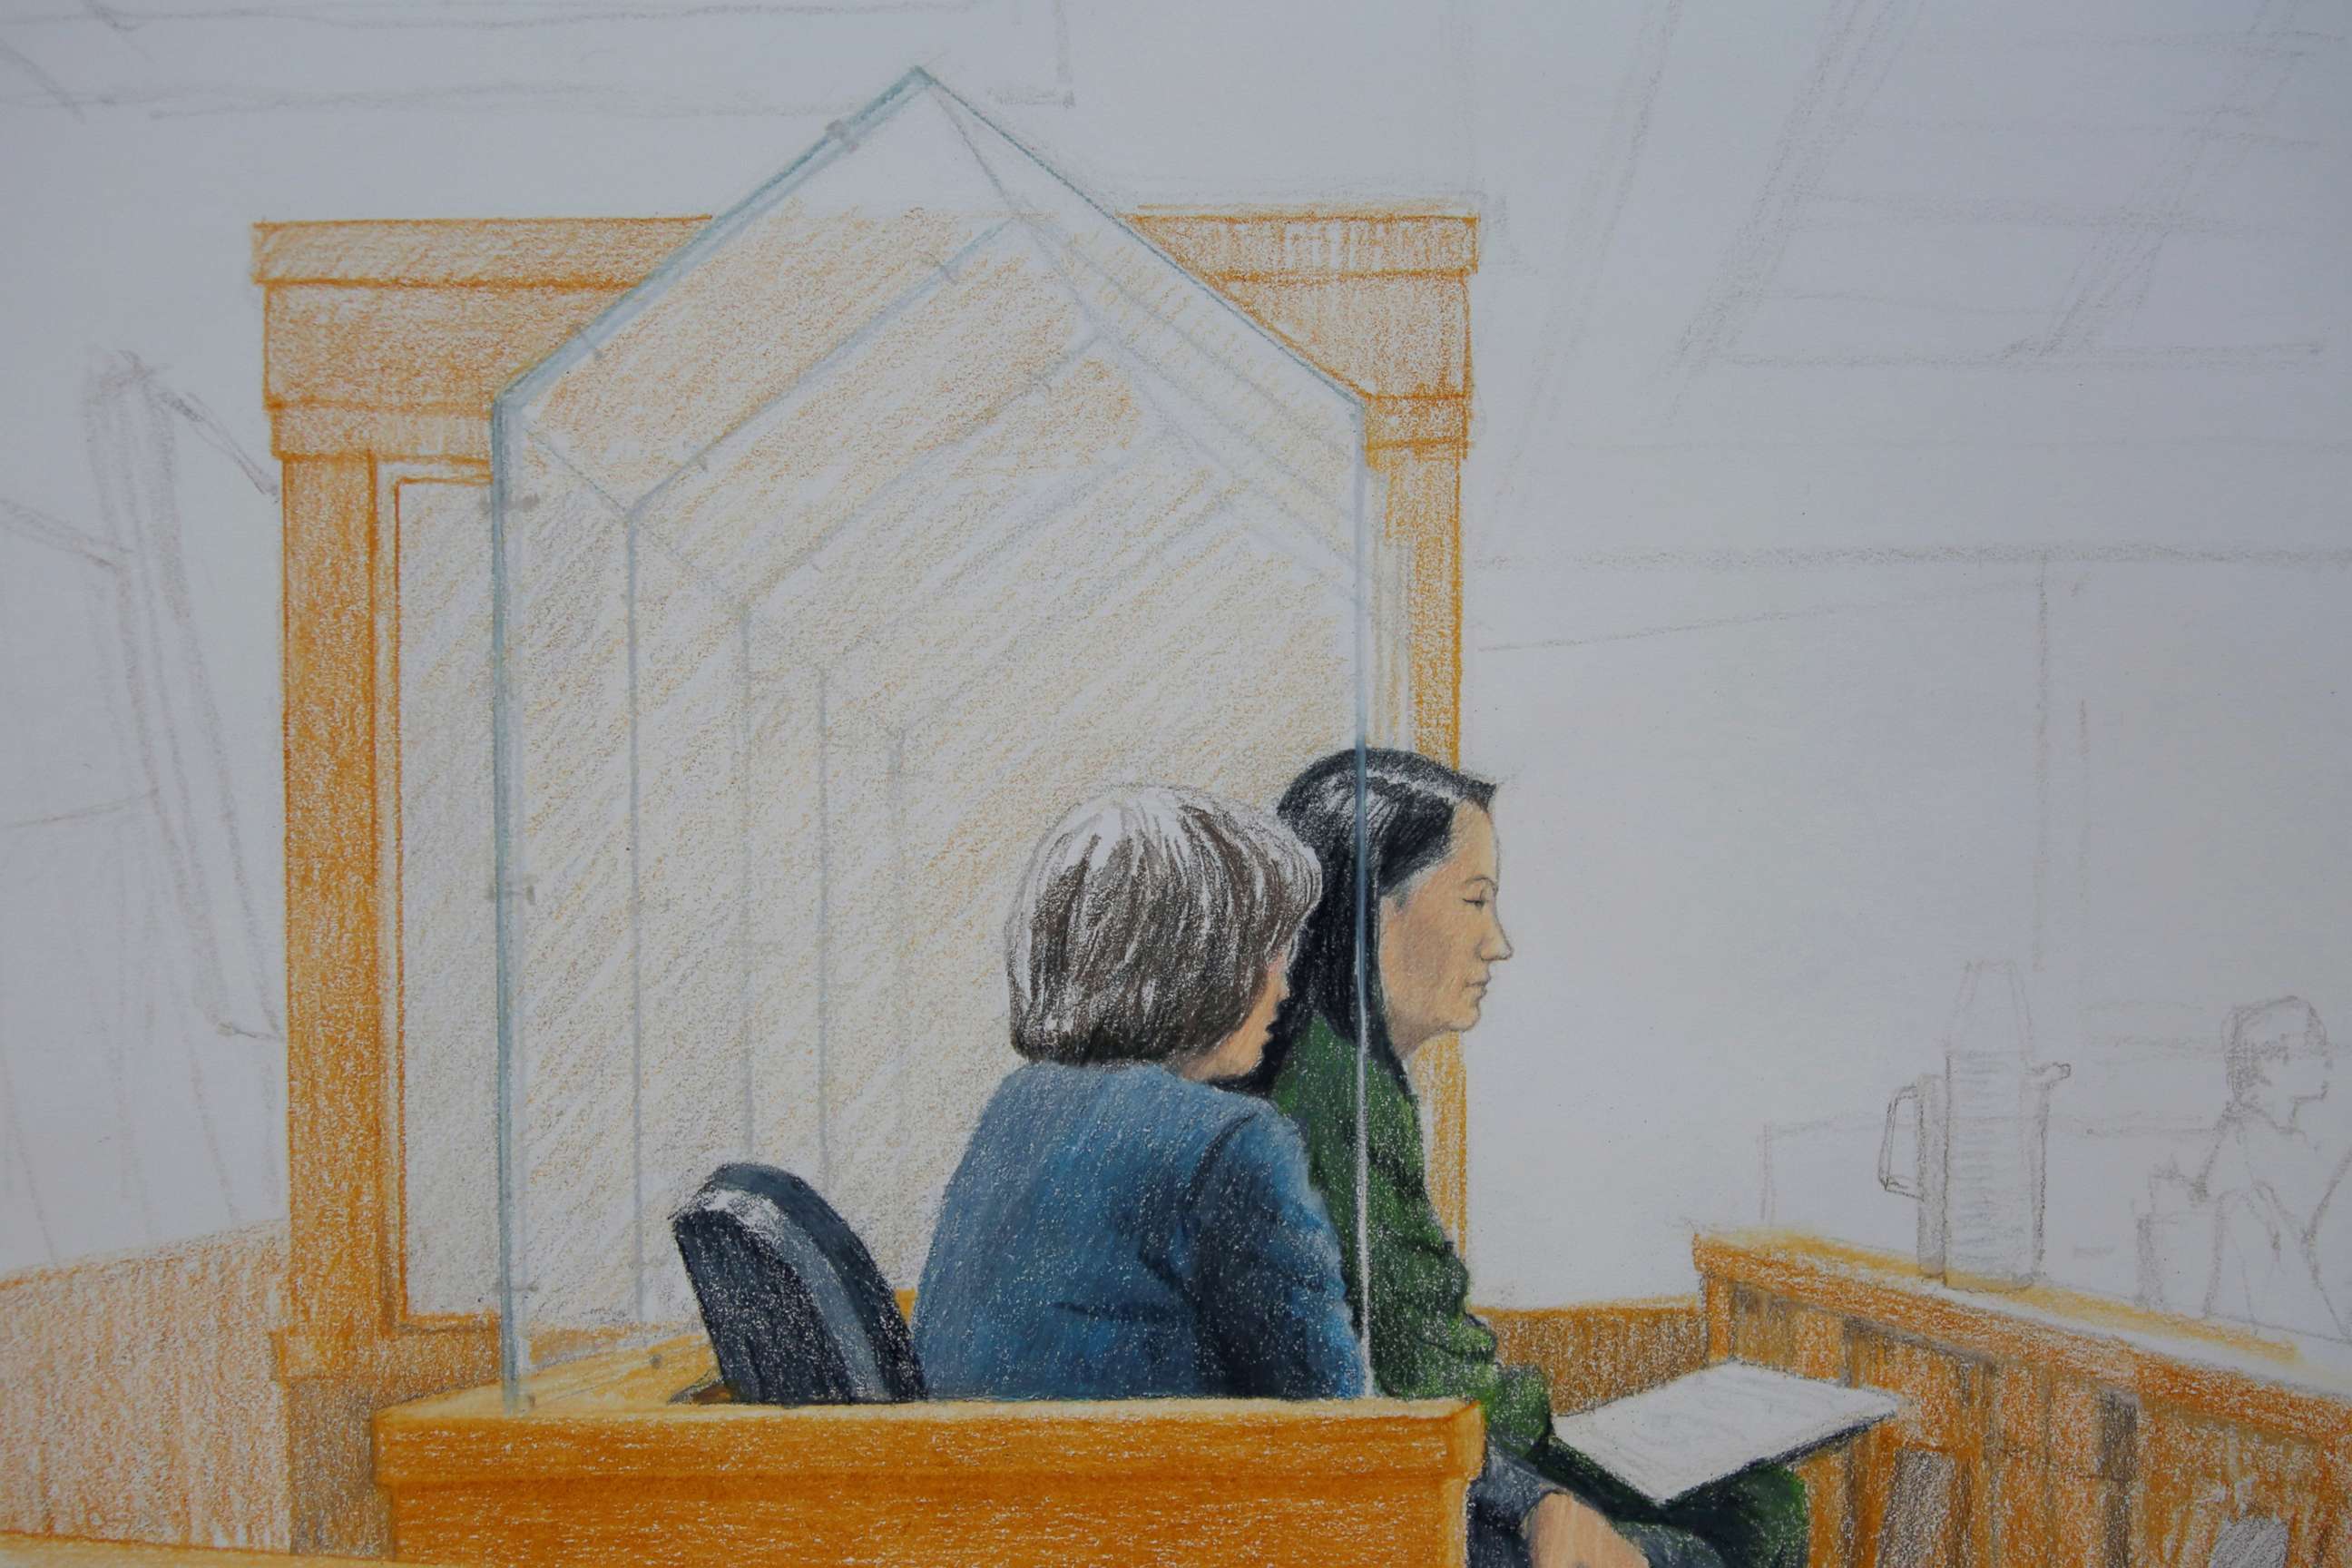 PHOTO: Huawei CFO Meng Wanzhou, who was arrested on an extradition warrant, appears at her B.C. Supreme Court bail hearing in a drawing in Vancouver, British Columbia, Canada, Dec. 7, 2018.